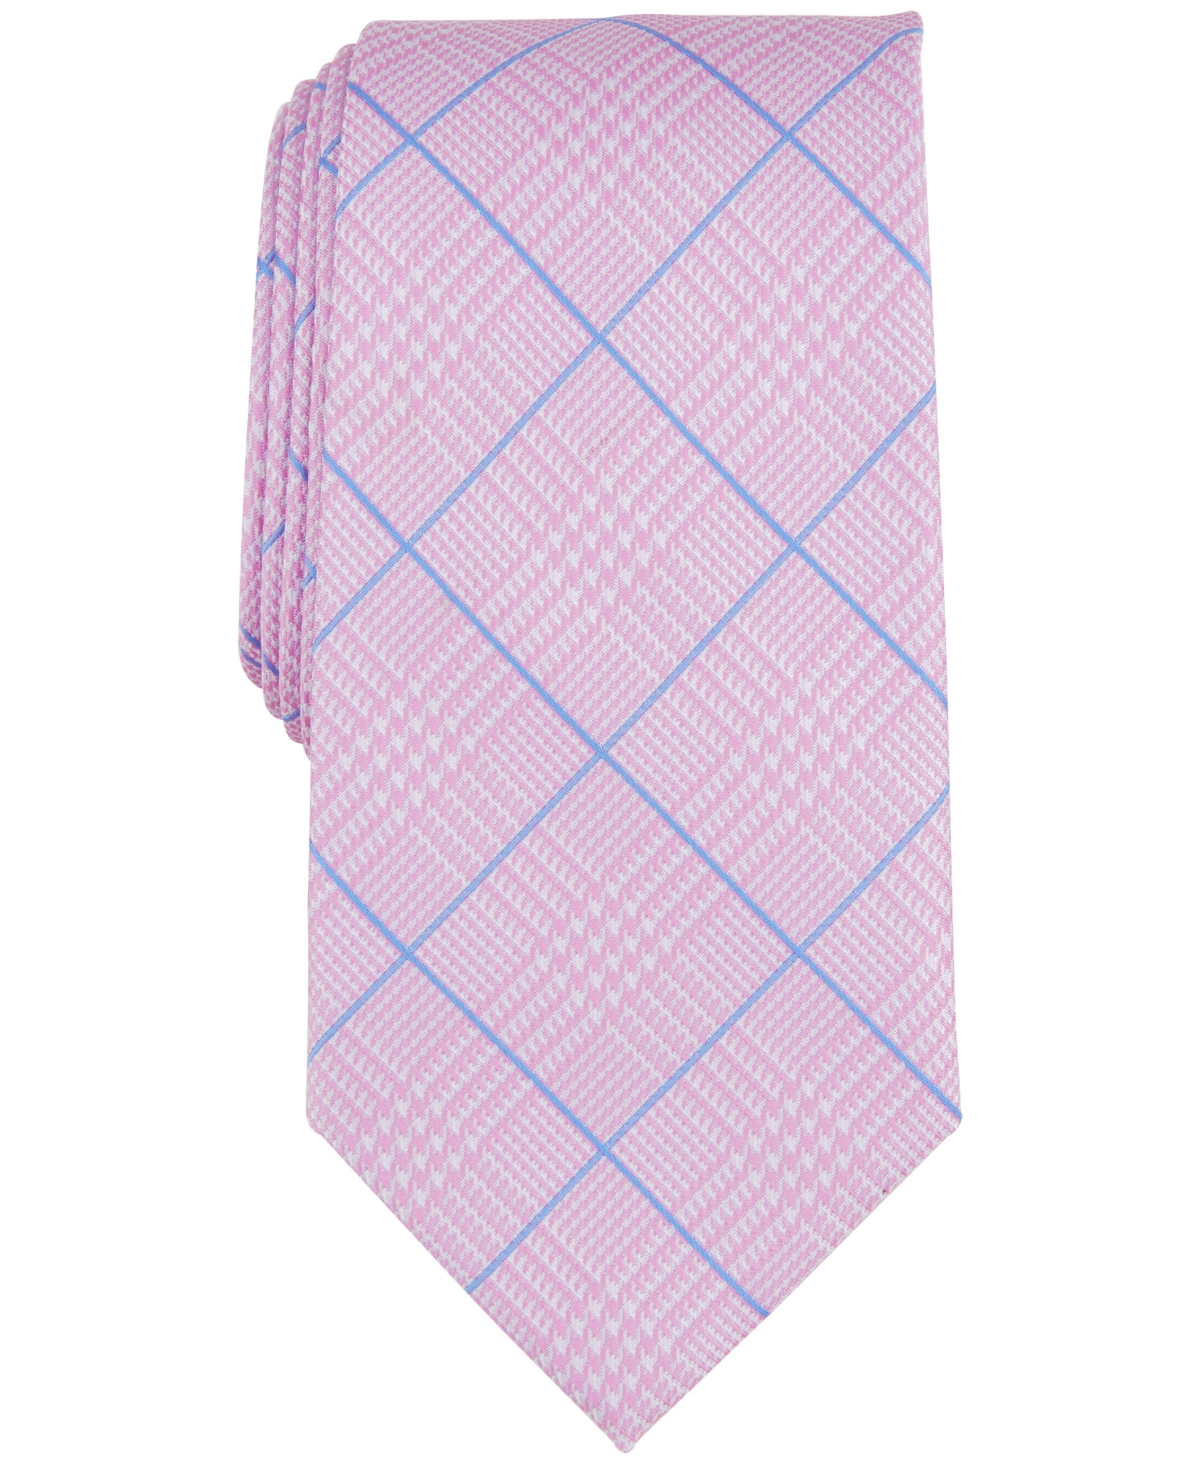 Men's Plaid Tie, Created for Macy's - Pink